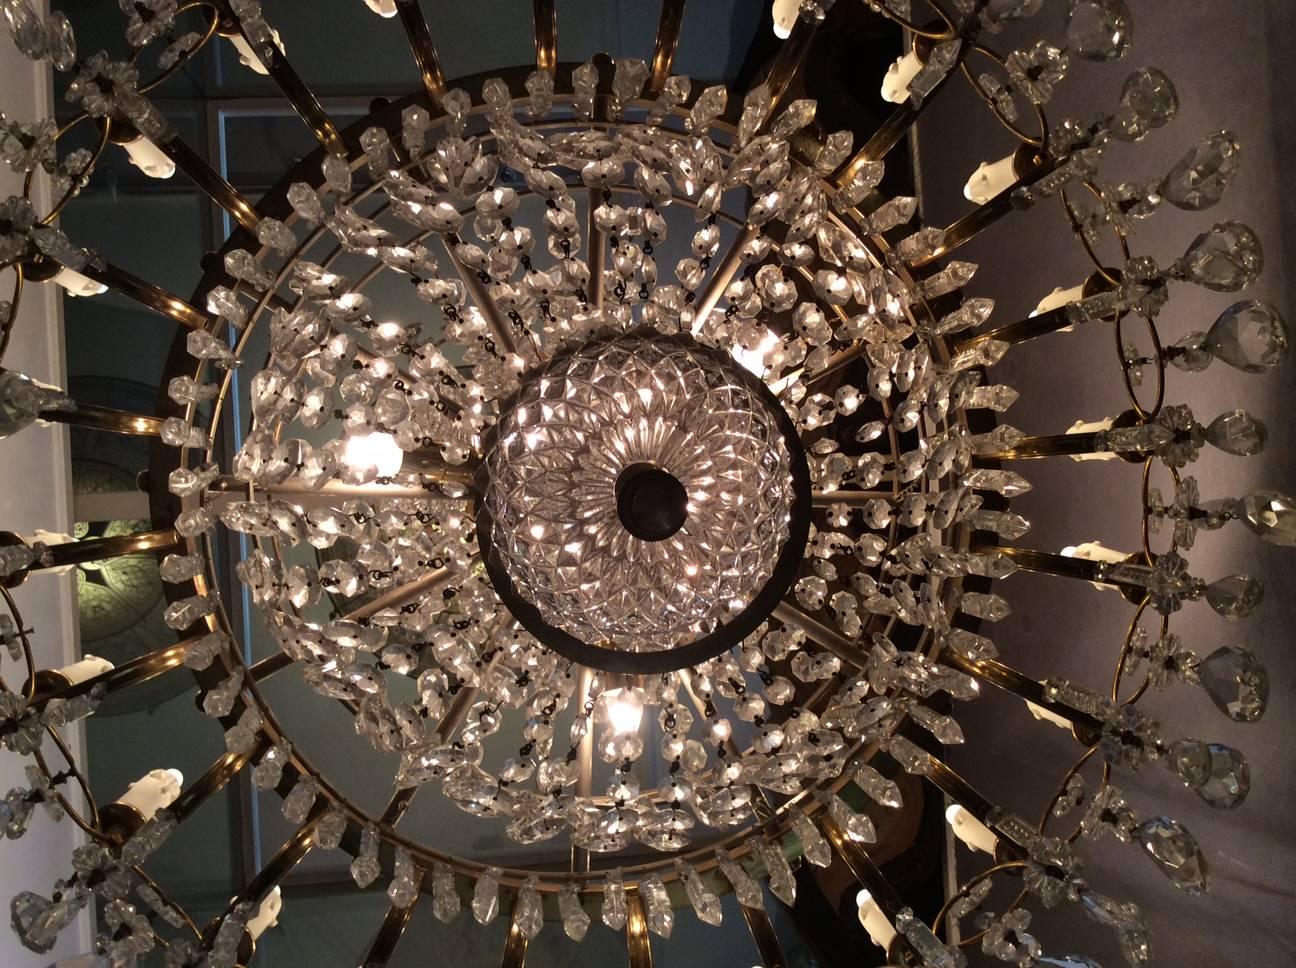 Cast Crystal Chandelier with 24 Arms of Light, France, circa 1940